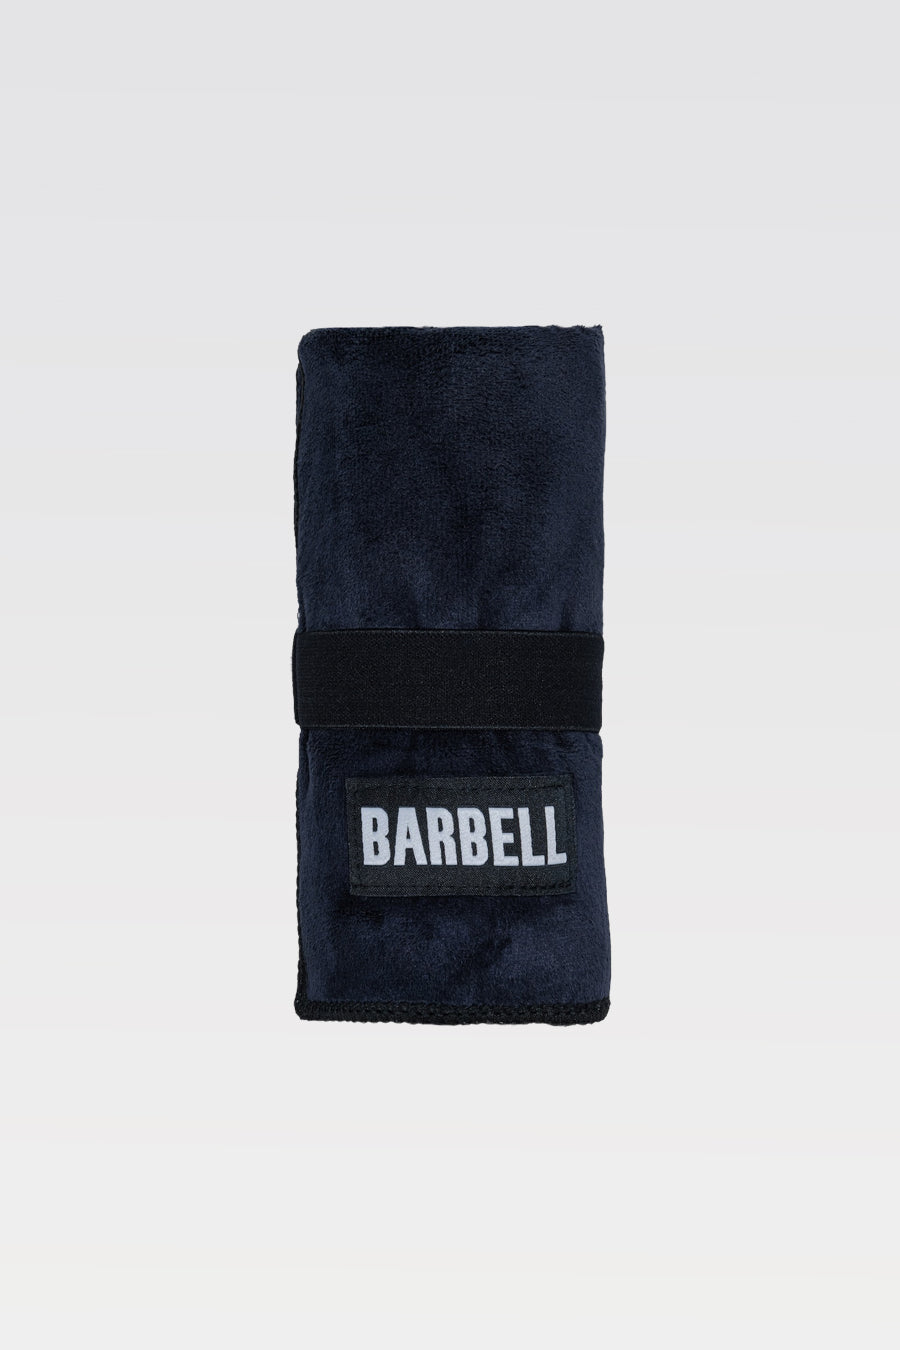 why we made the Barbell Gym Towel